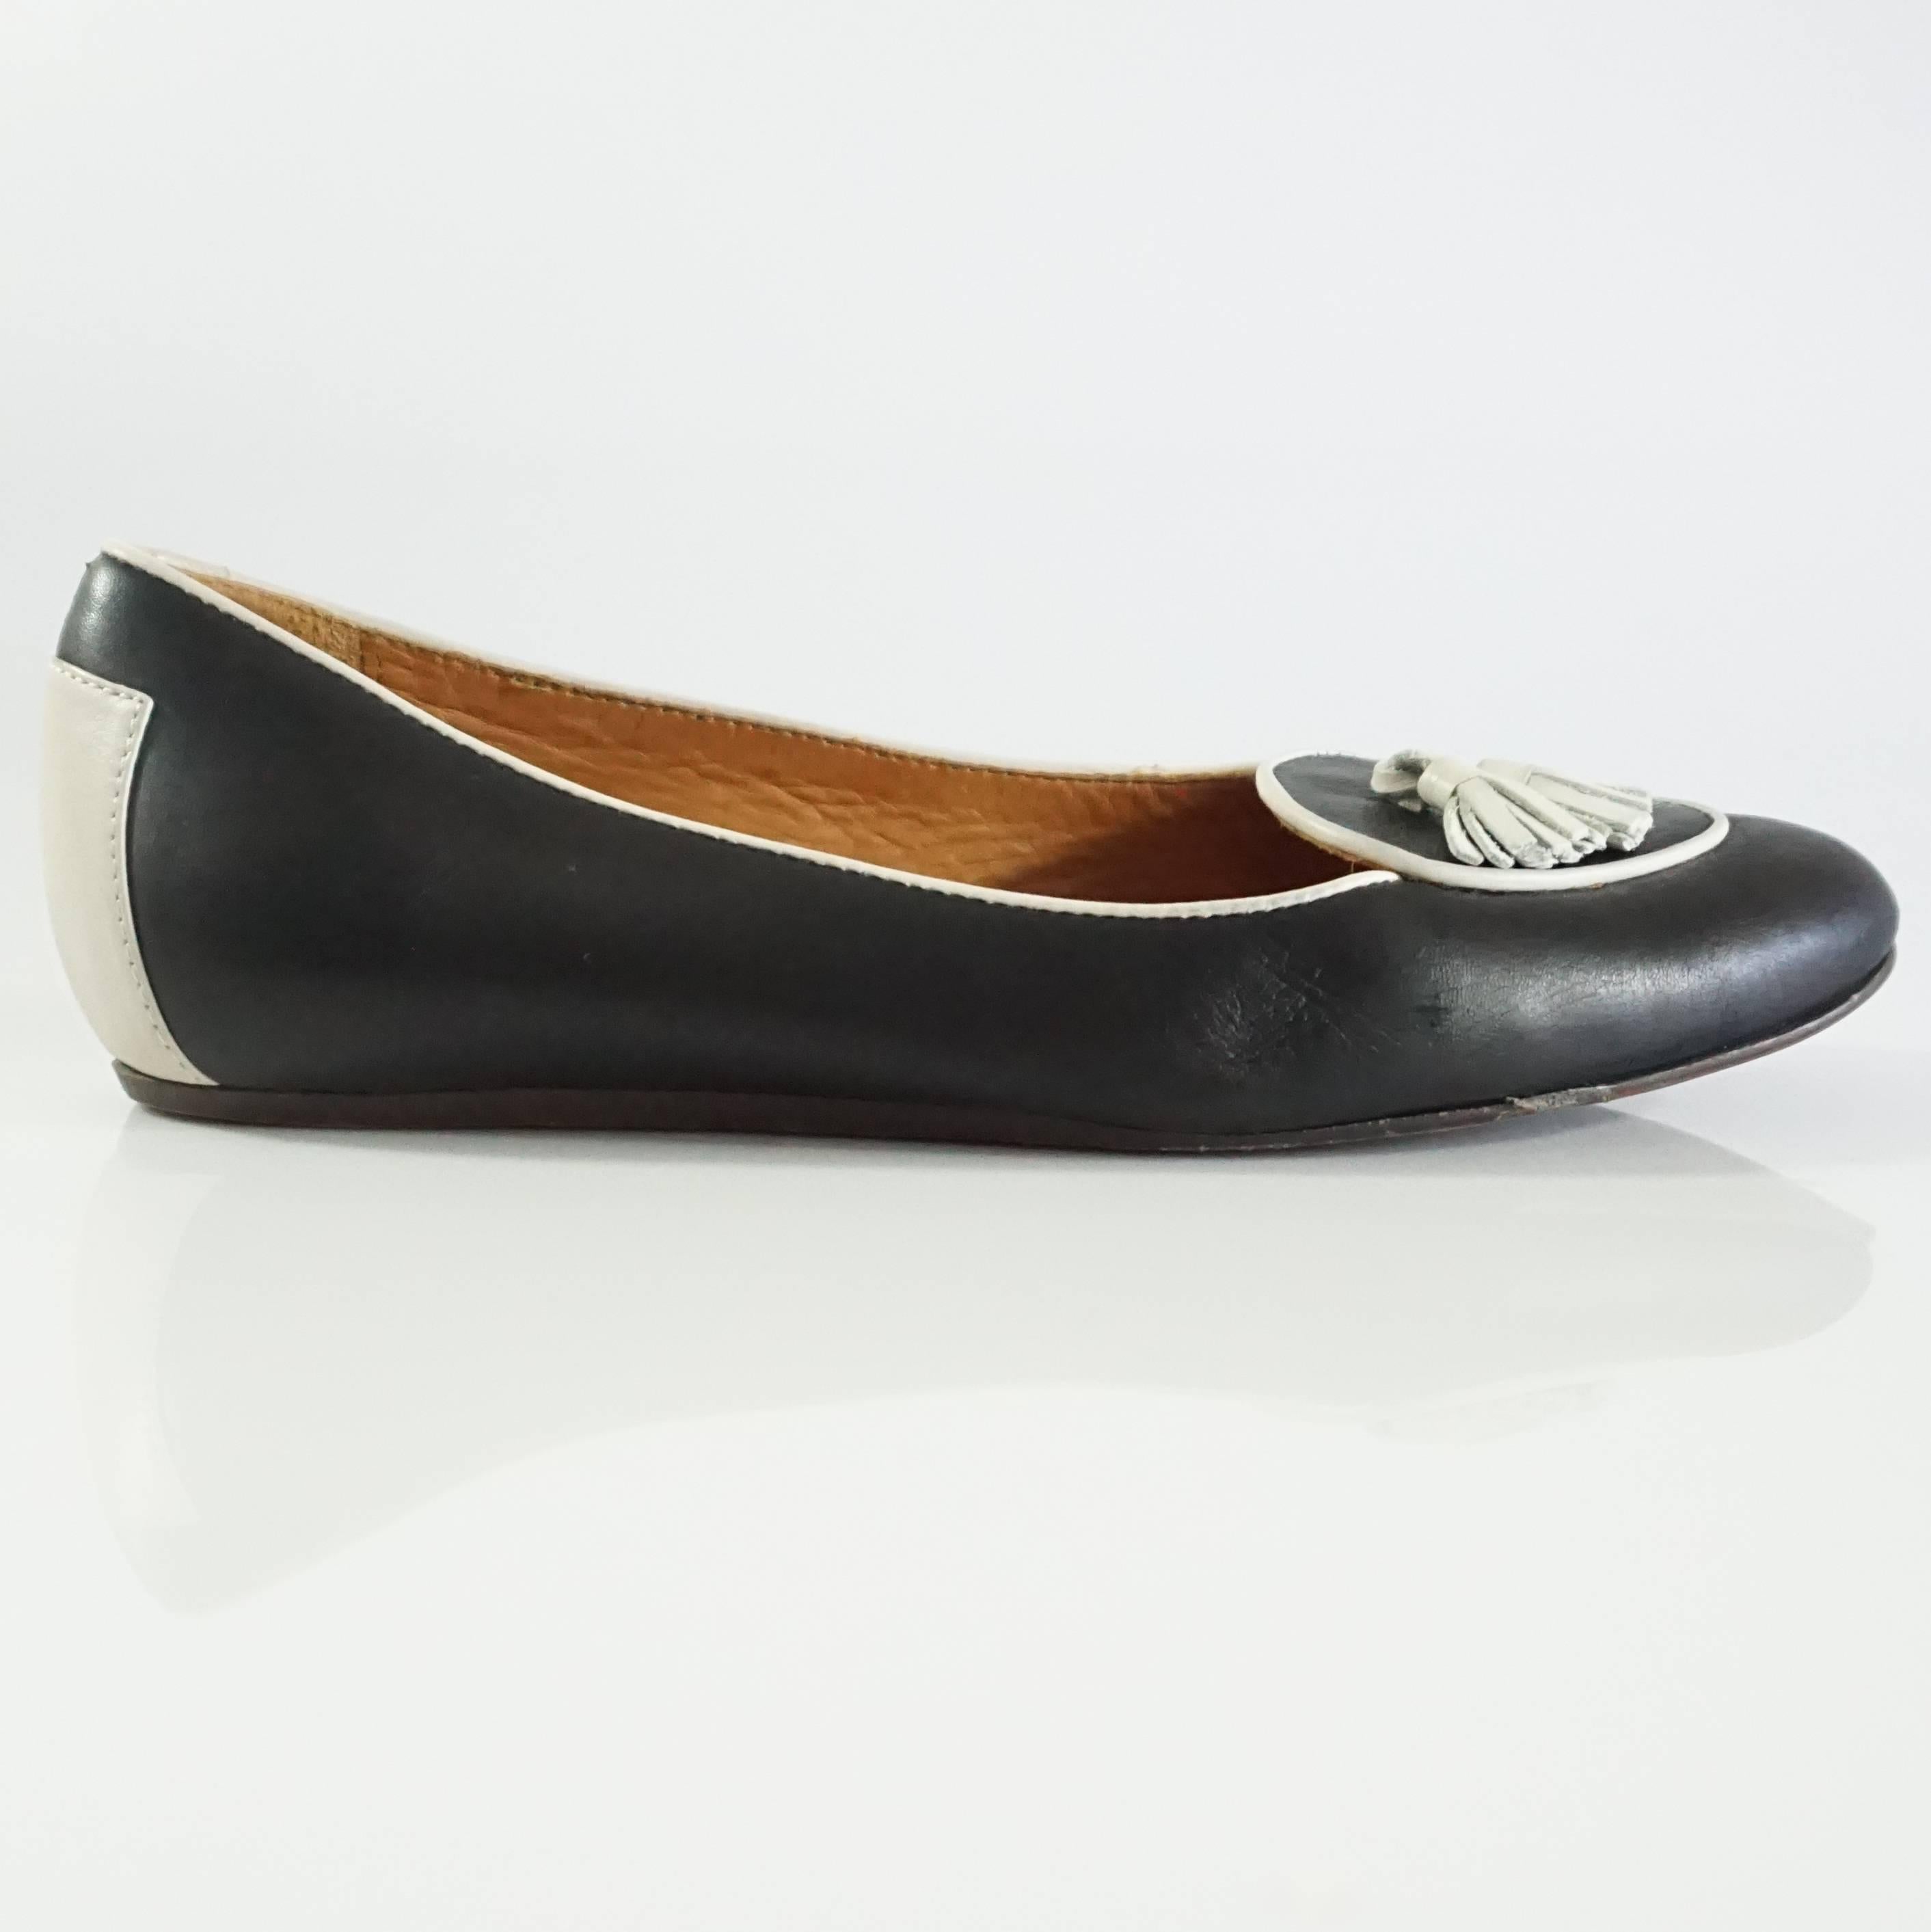 These Lanvin loafers are black leather with ivory trim. They feature ivory tassels on the toes. These shoes are in very good condition with minor bottom wear and overall wear. Size 37.5.
